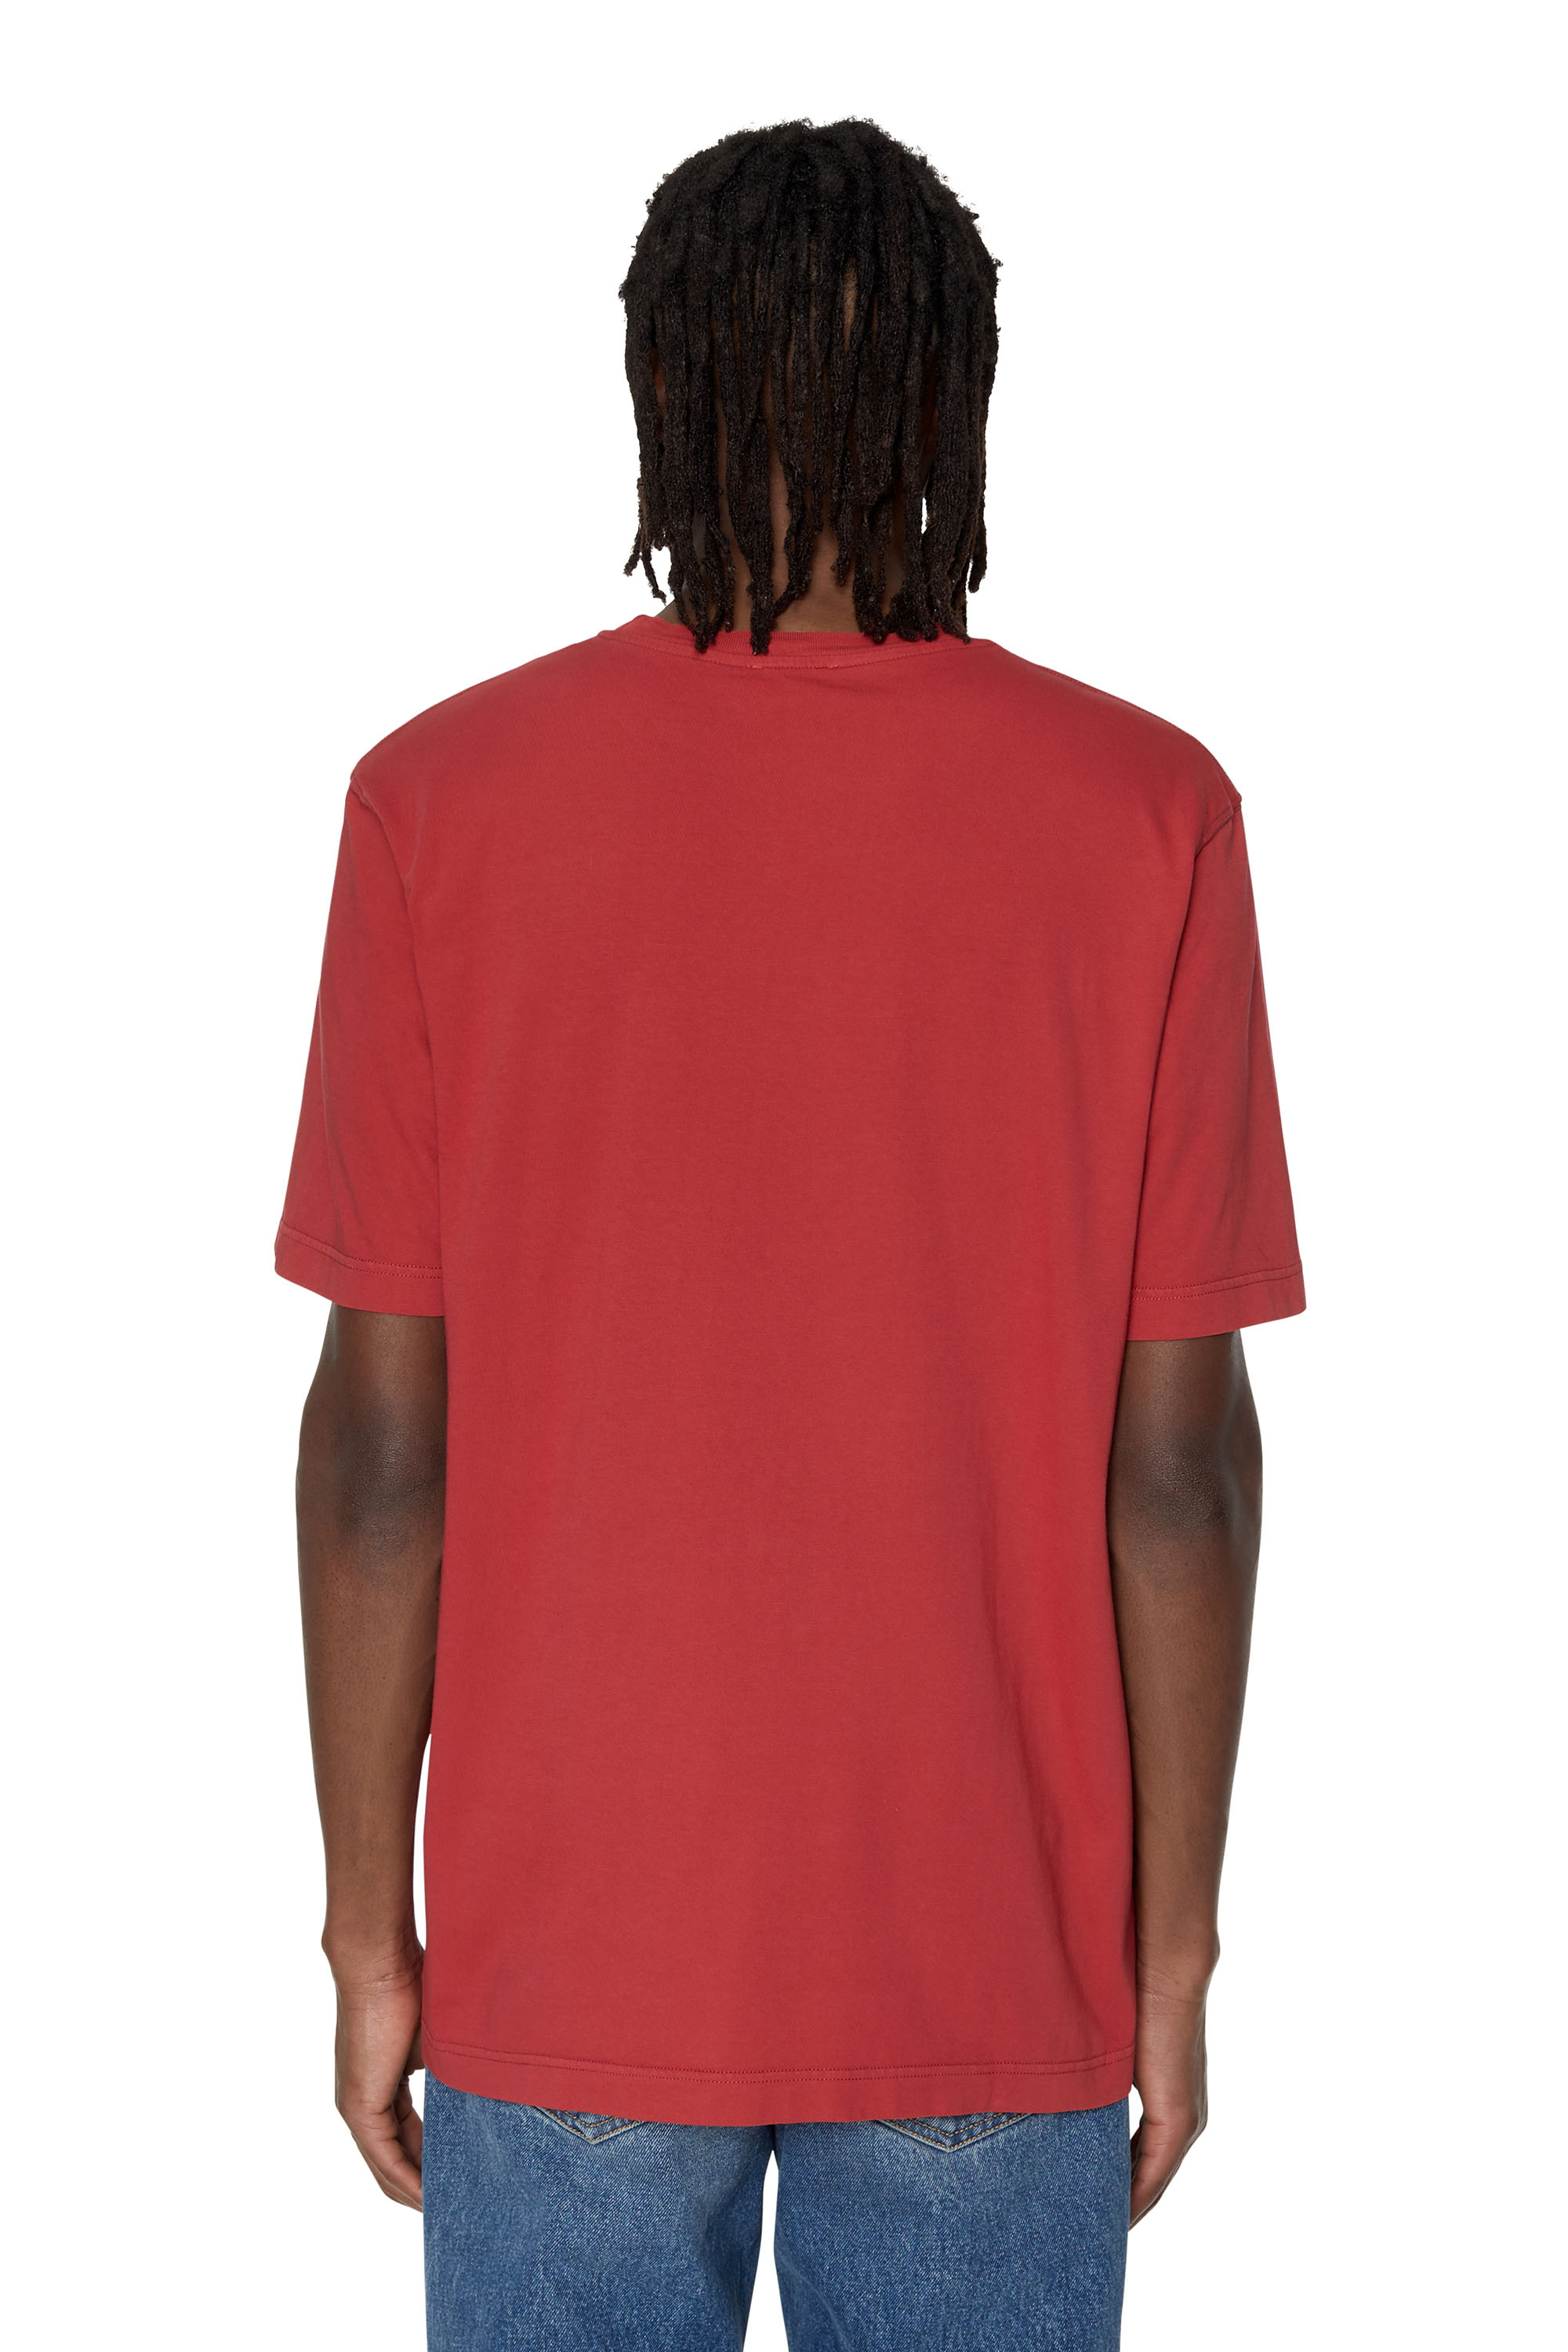 Diesel - T-JUST-E16, Rosso - Image 2